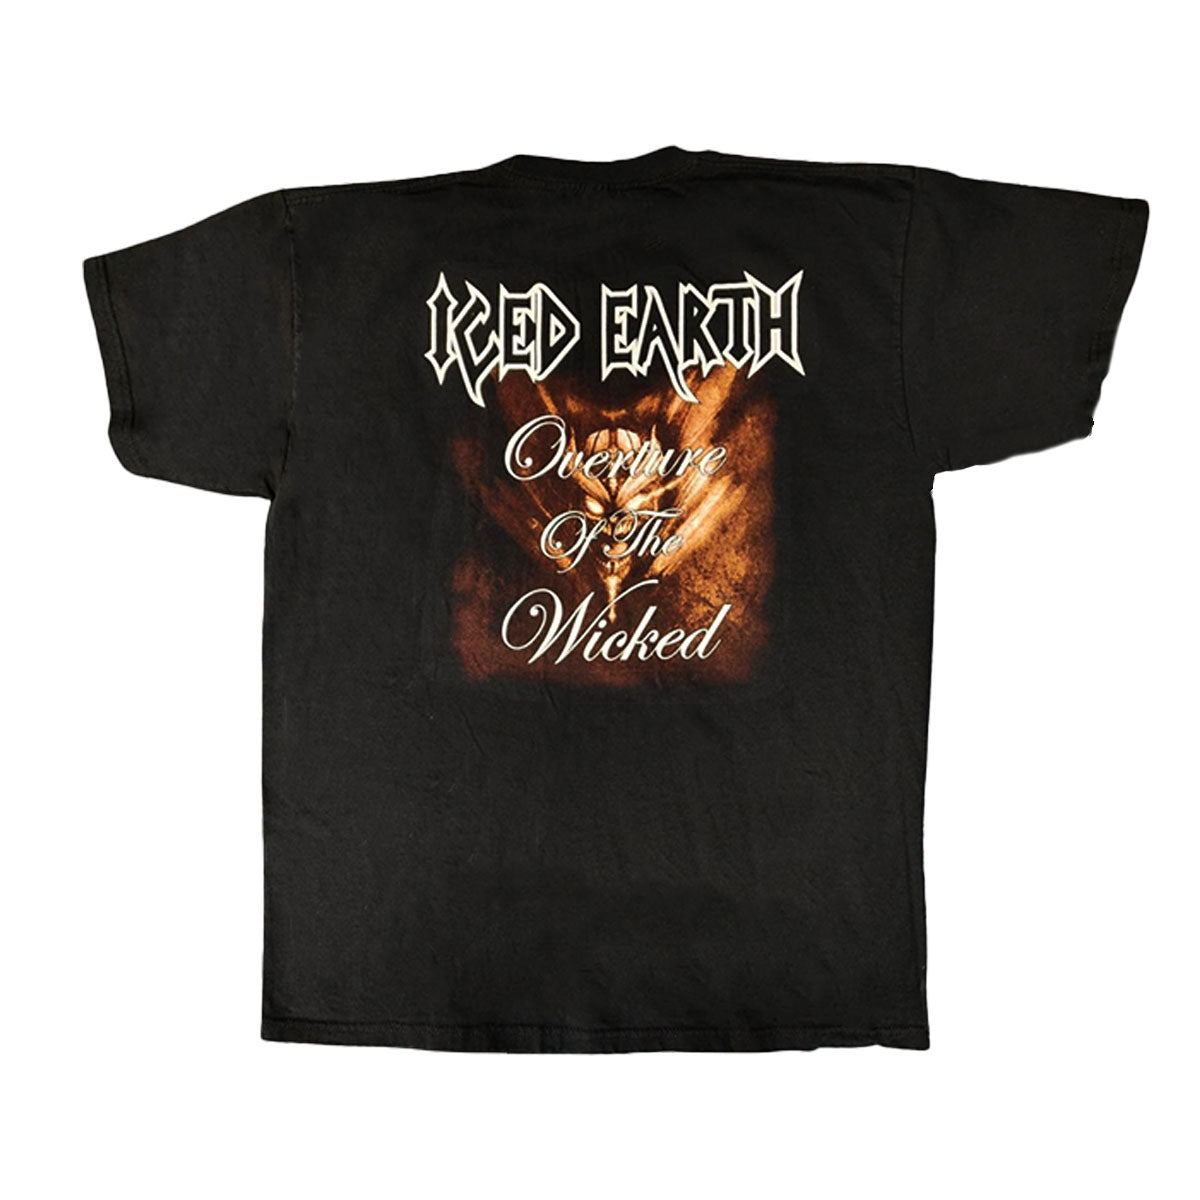 ICED EARTH Overture of the Wicked T-Shirt